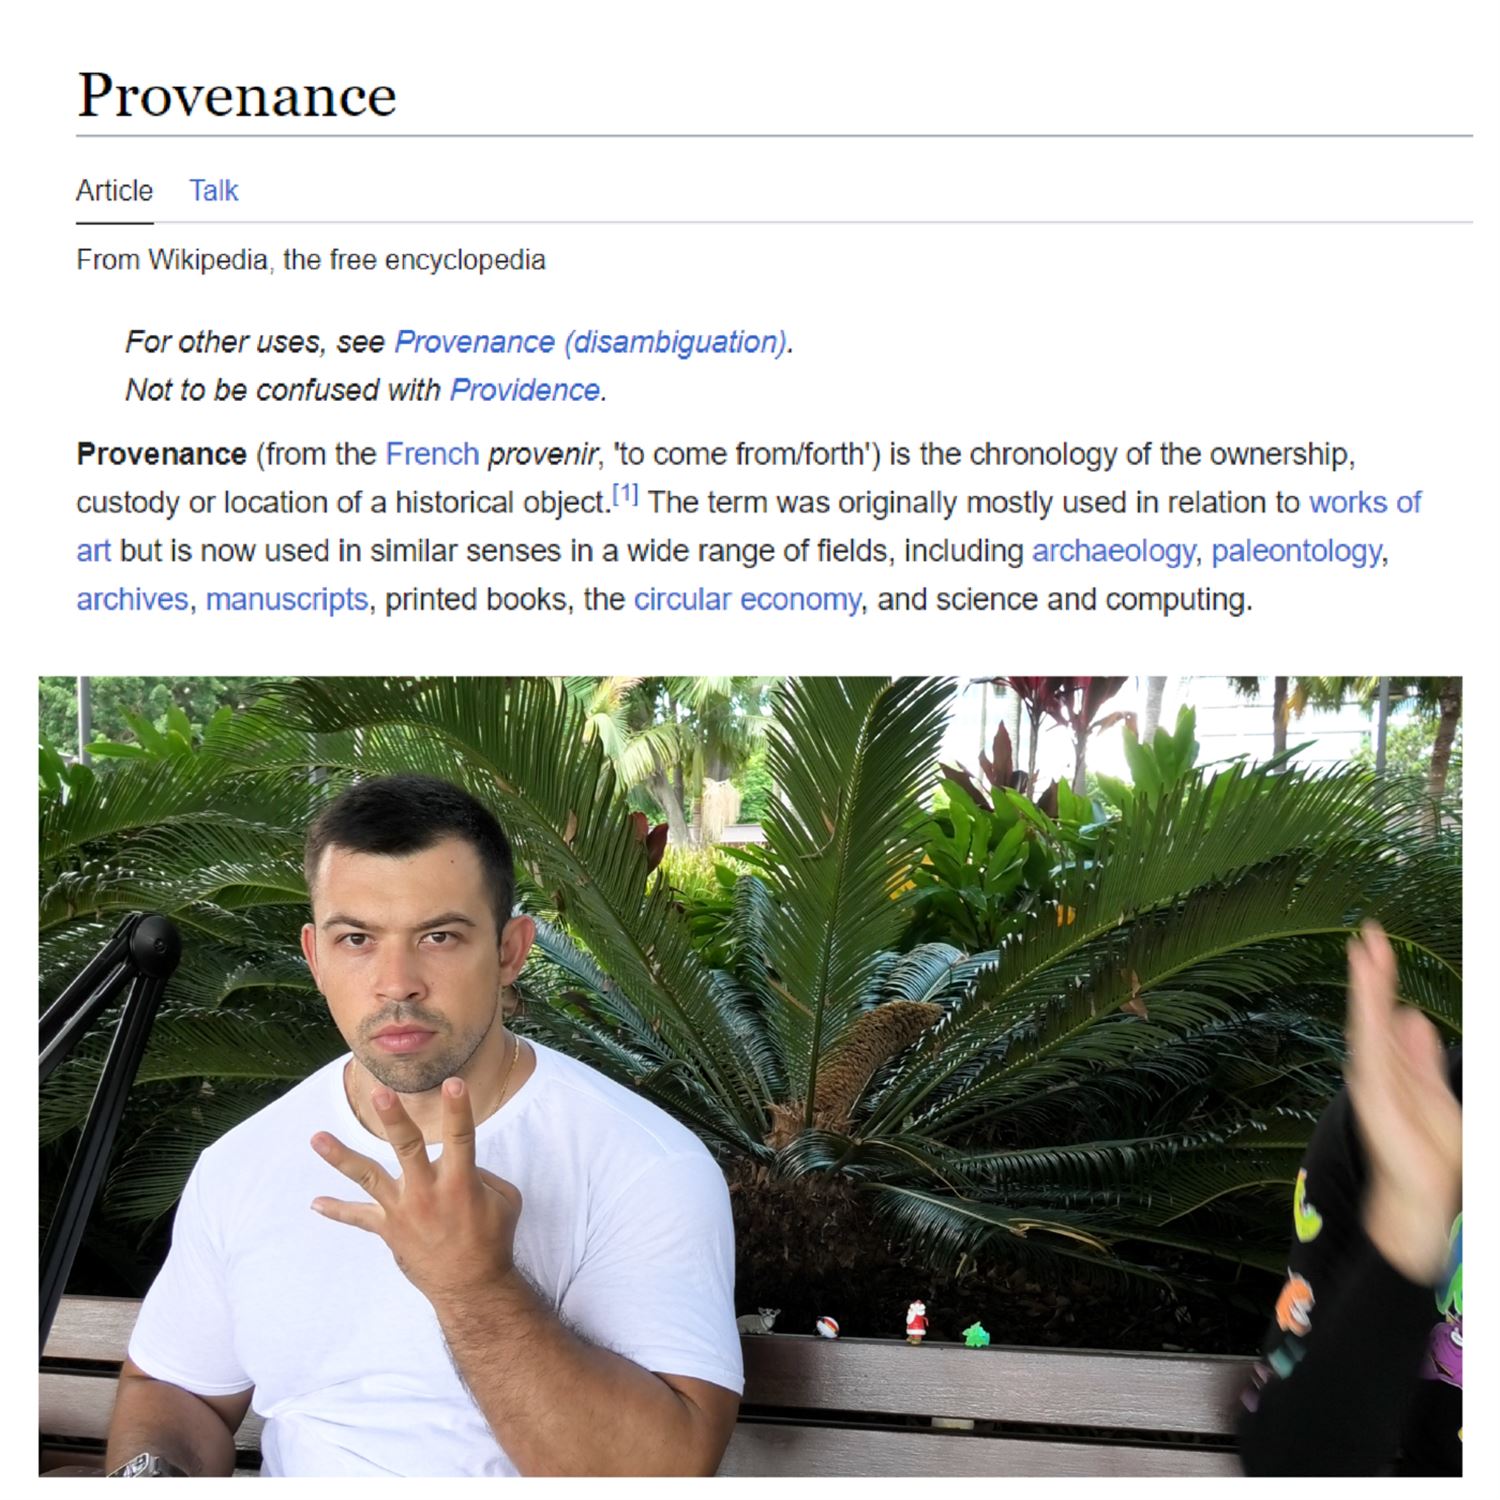 Provenance and chat comments